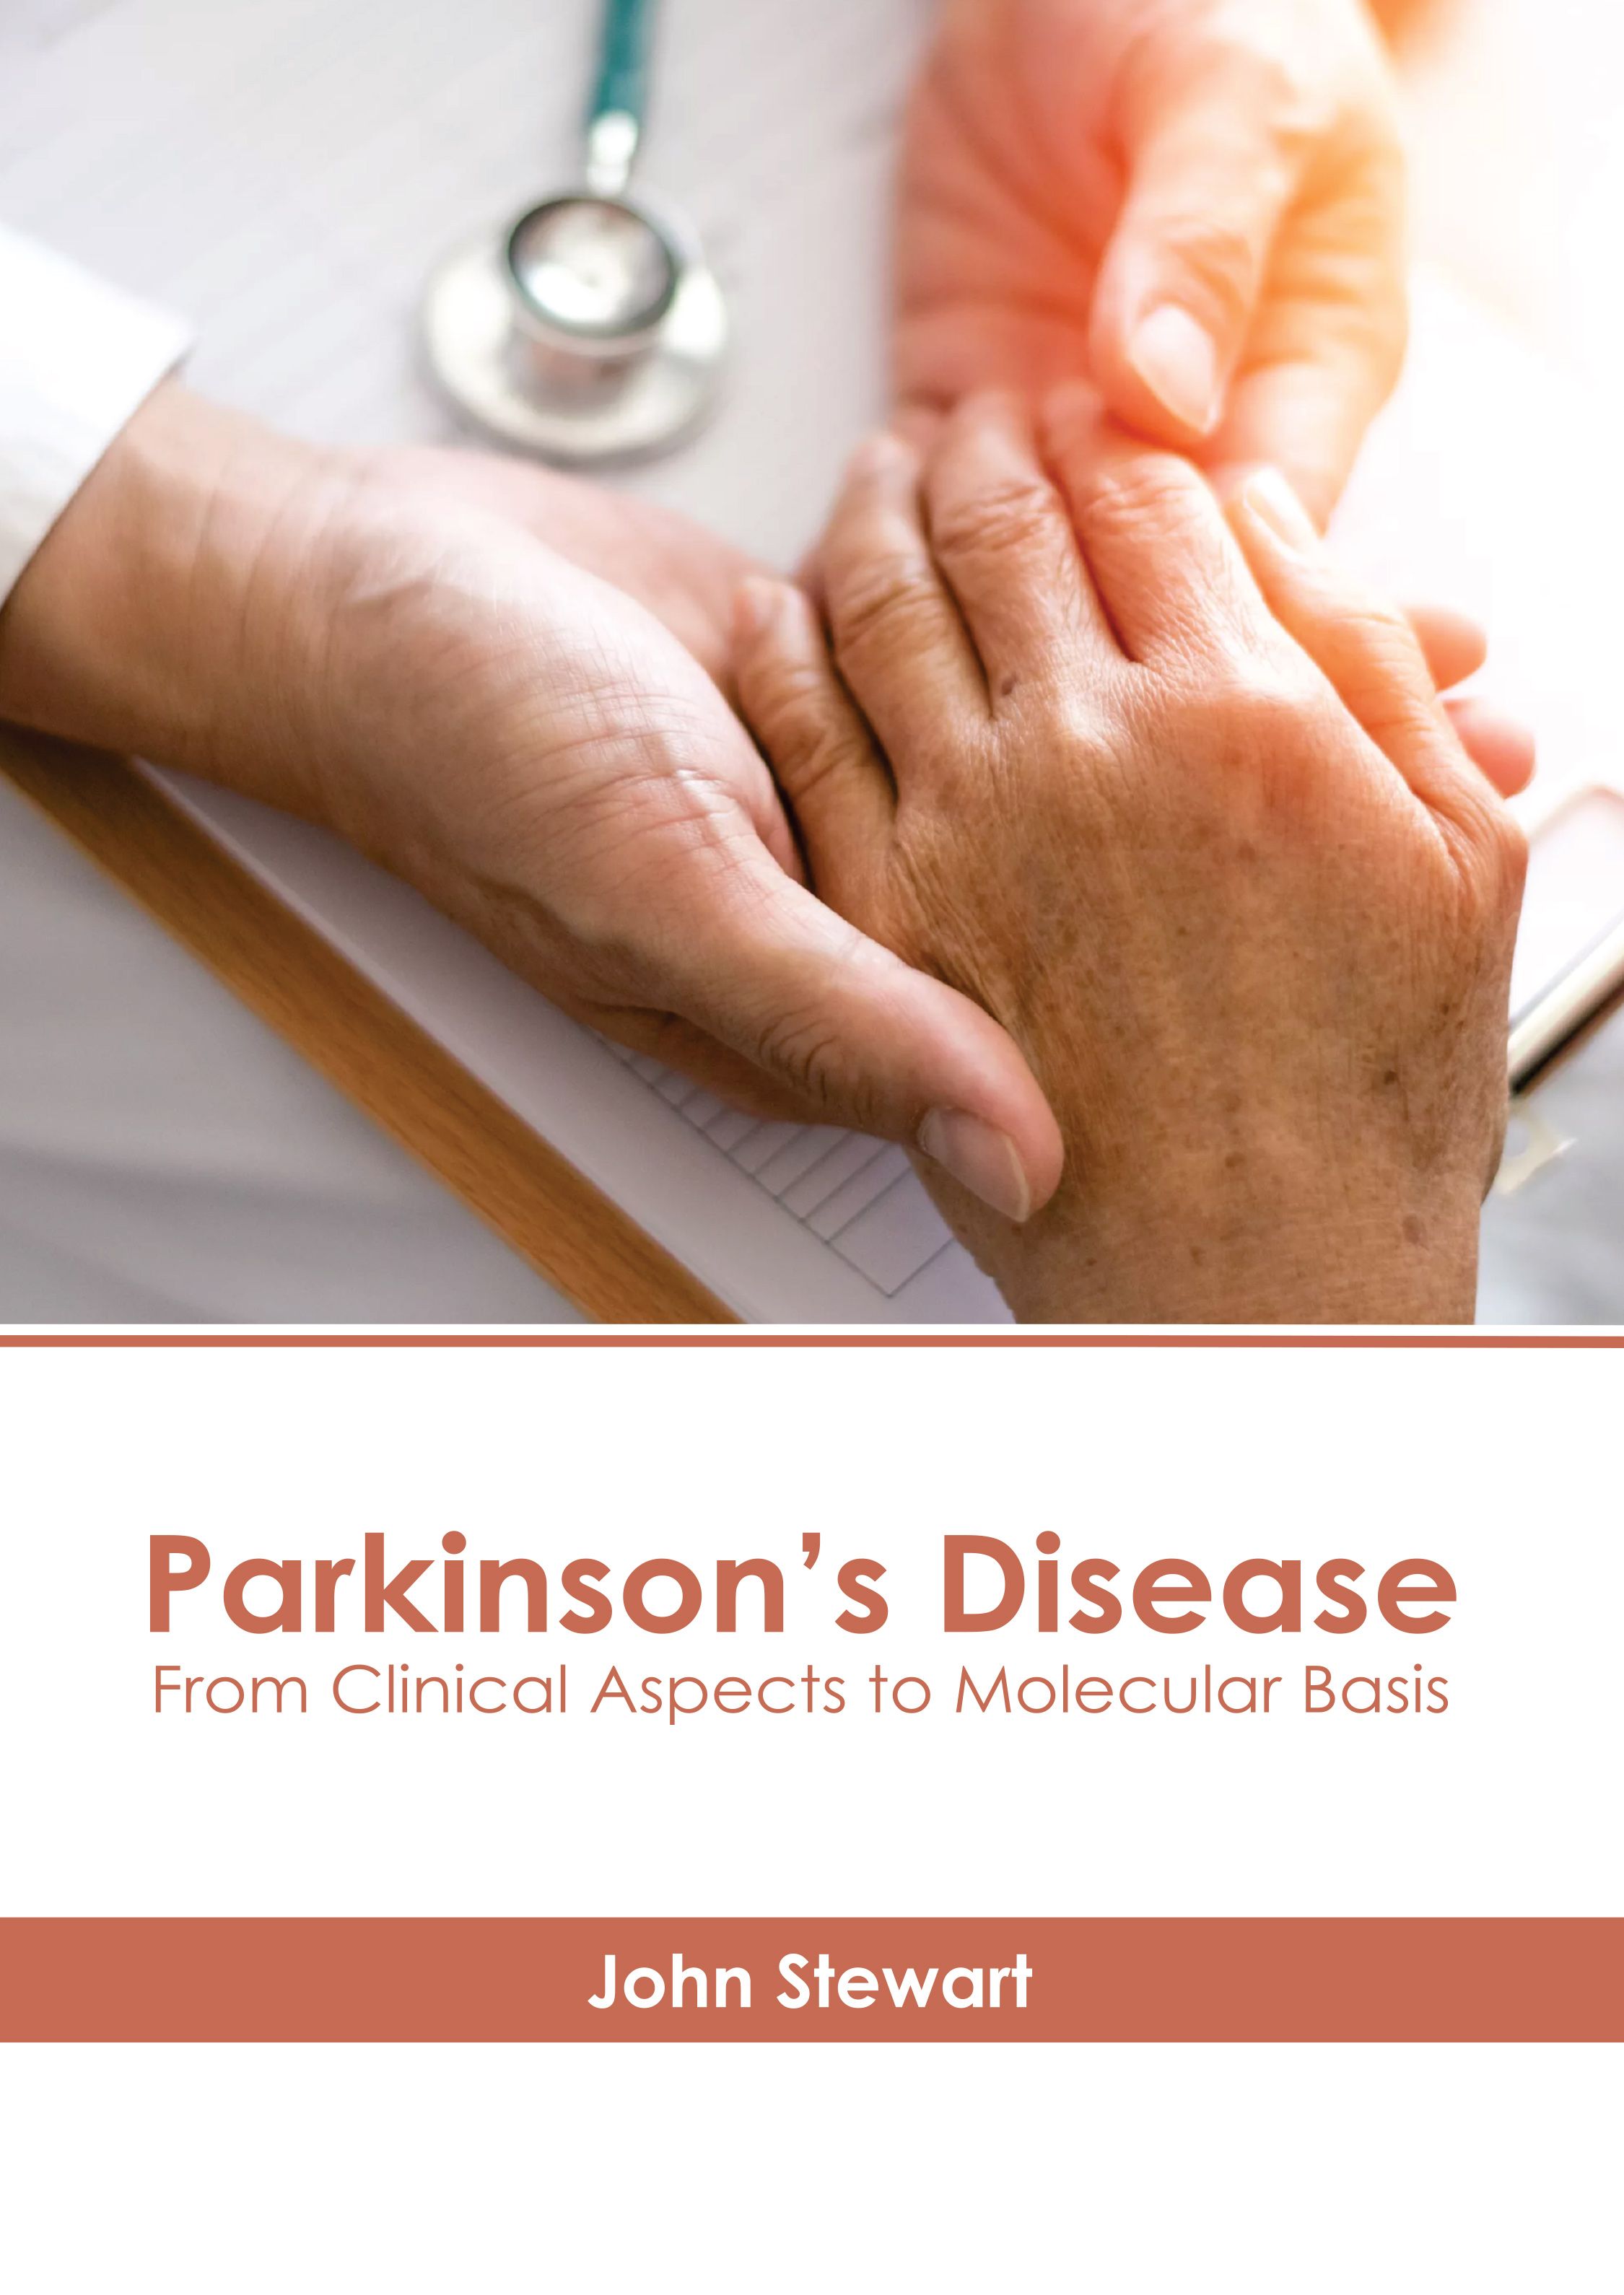 

exclusive-publishers/american-medical-publishers/parkinson-s-disease-from-clinical-aspects-to-molecular-basis-9781639277780